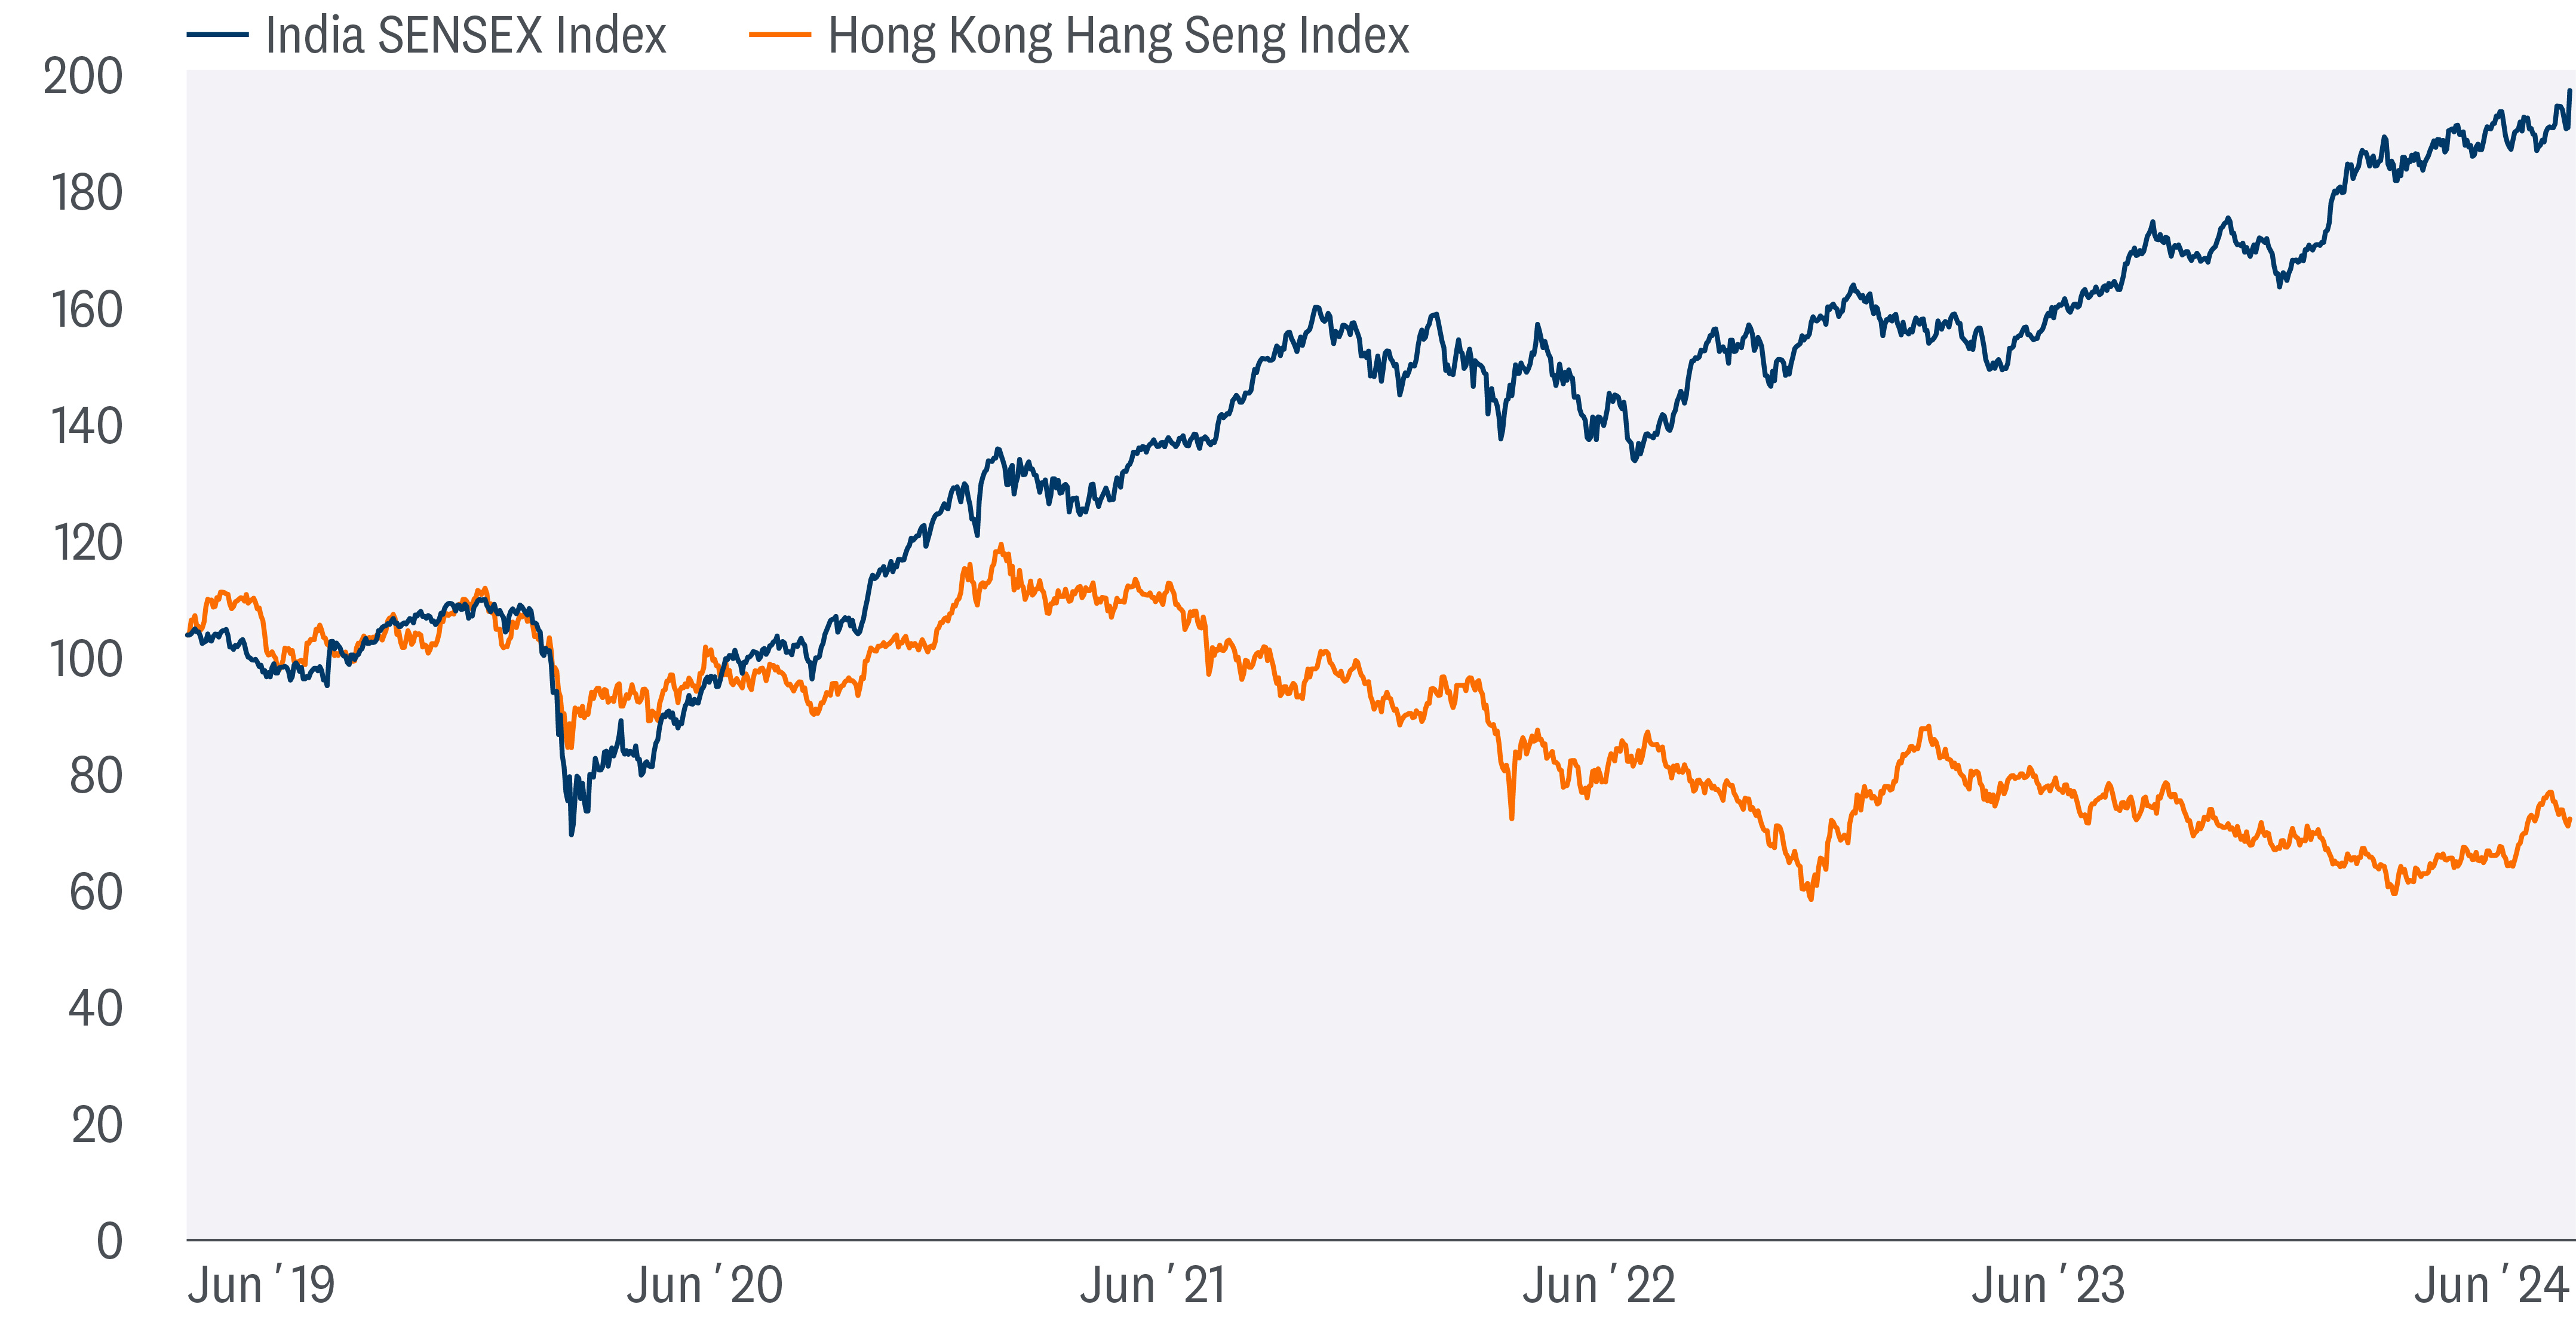 The chart depicts the development of the SENSEX Index (India) and the Hang Seng Index over time. The X-Axis lists the time in years, starting from June 2019 to June 2024. The Y-Axis lists the index value. The blue line represents the SENSEX Index (India), the orange line the Hang Seng Index. The chart reveals that the SENSEX Index (India) outperformed the Hang Seng Index over the time period shown.